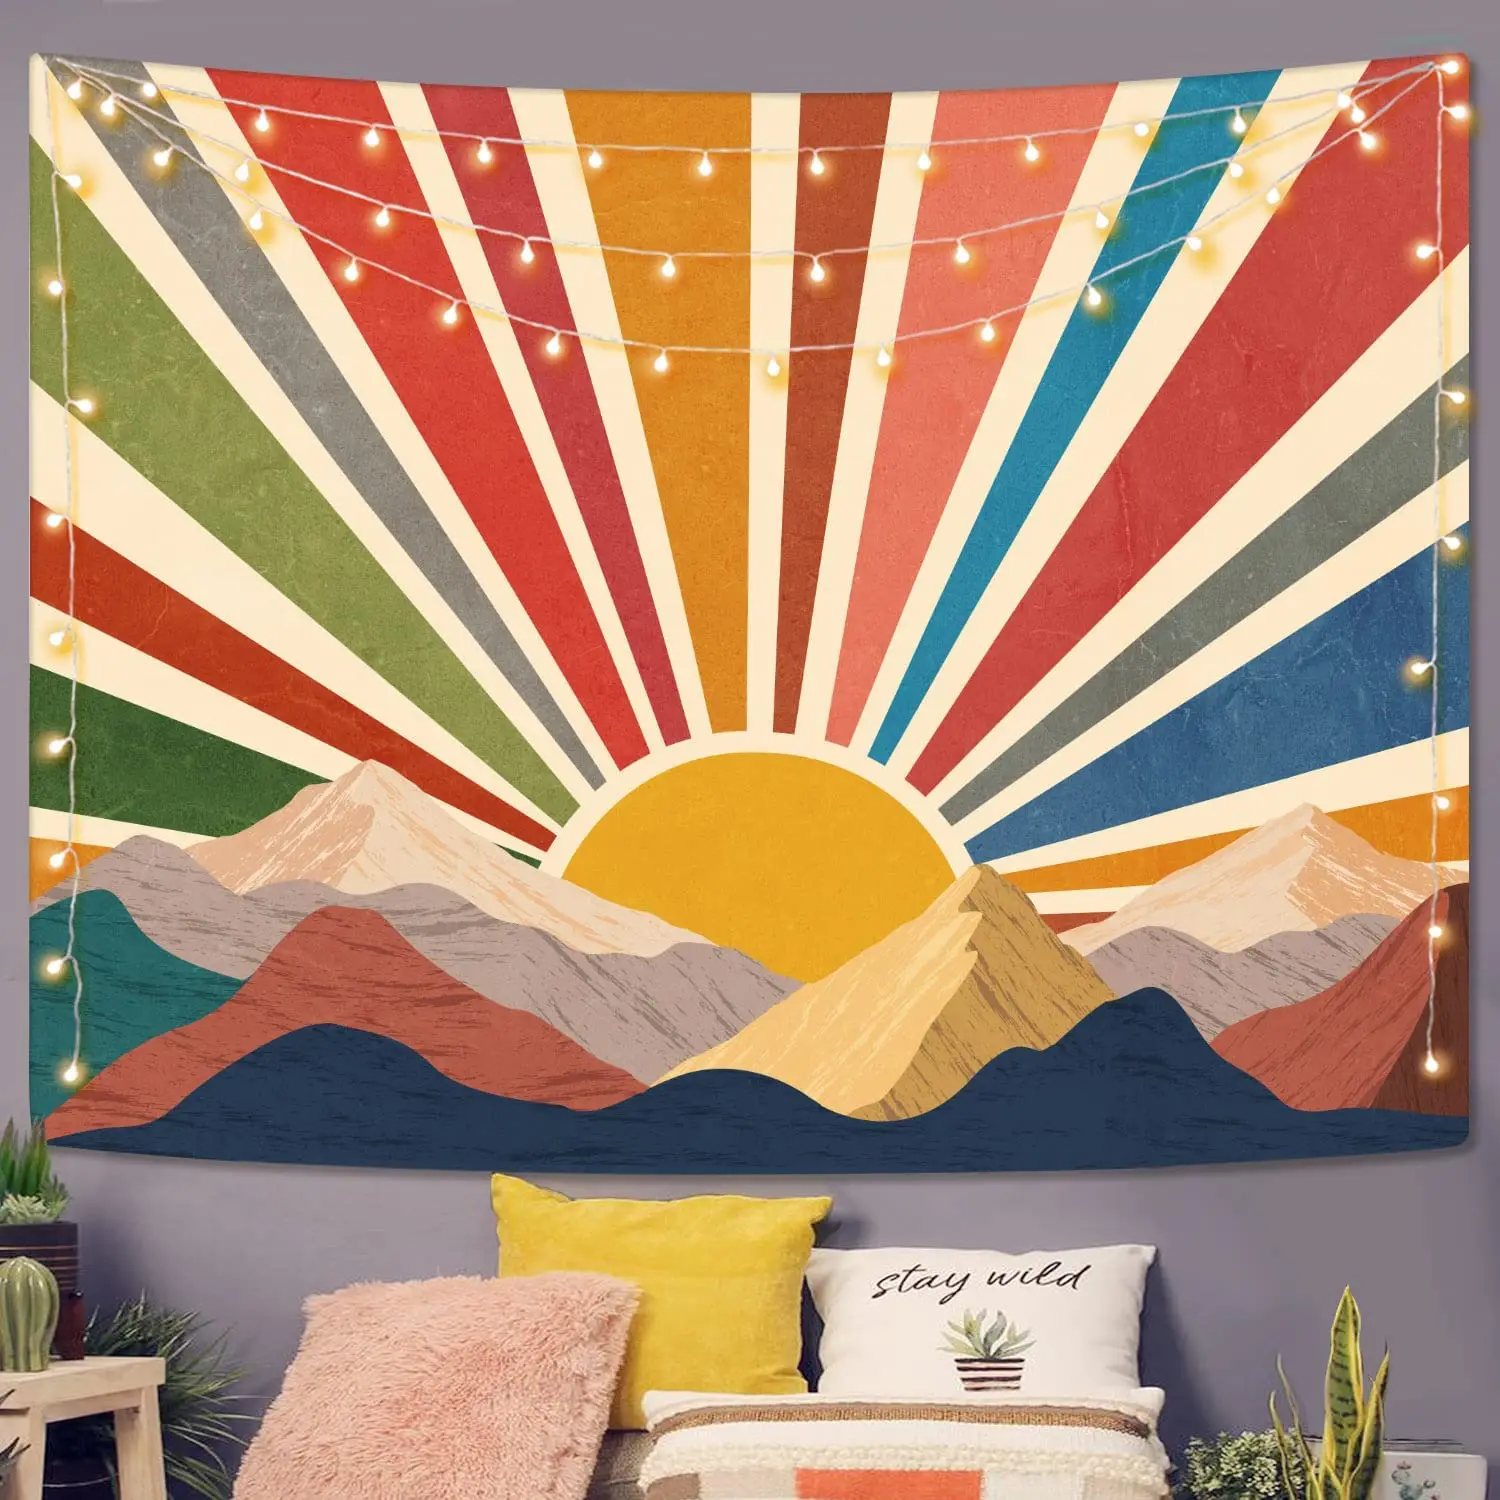 

Sun Tapestry Boho Mountain Abstract Wall Hanging Tapestries Sunrise Sunset Aesthetic Room Decor Hippie Vintage Rainbow Wall Art